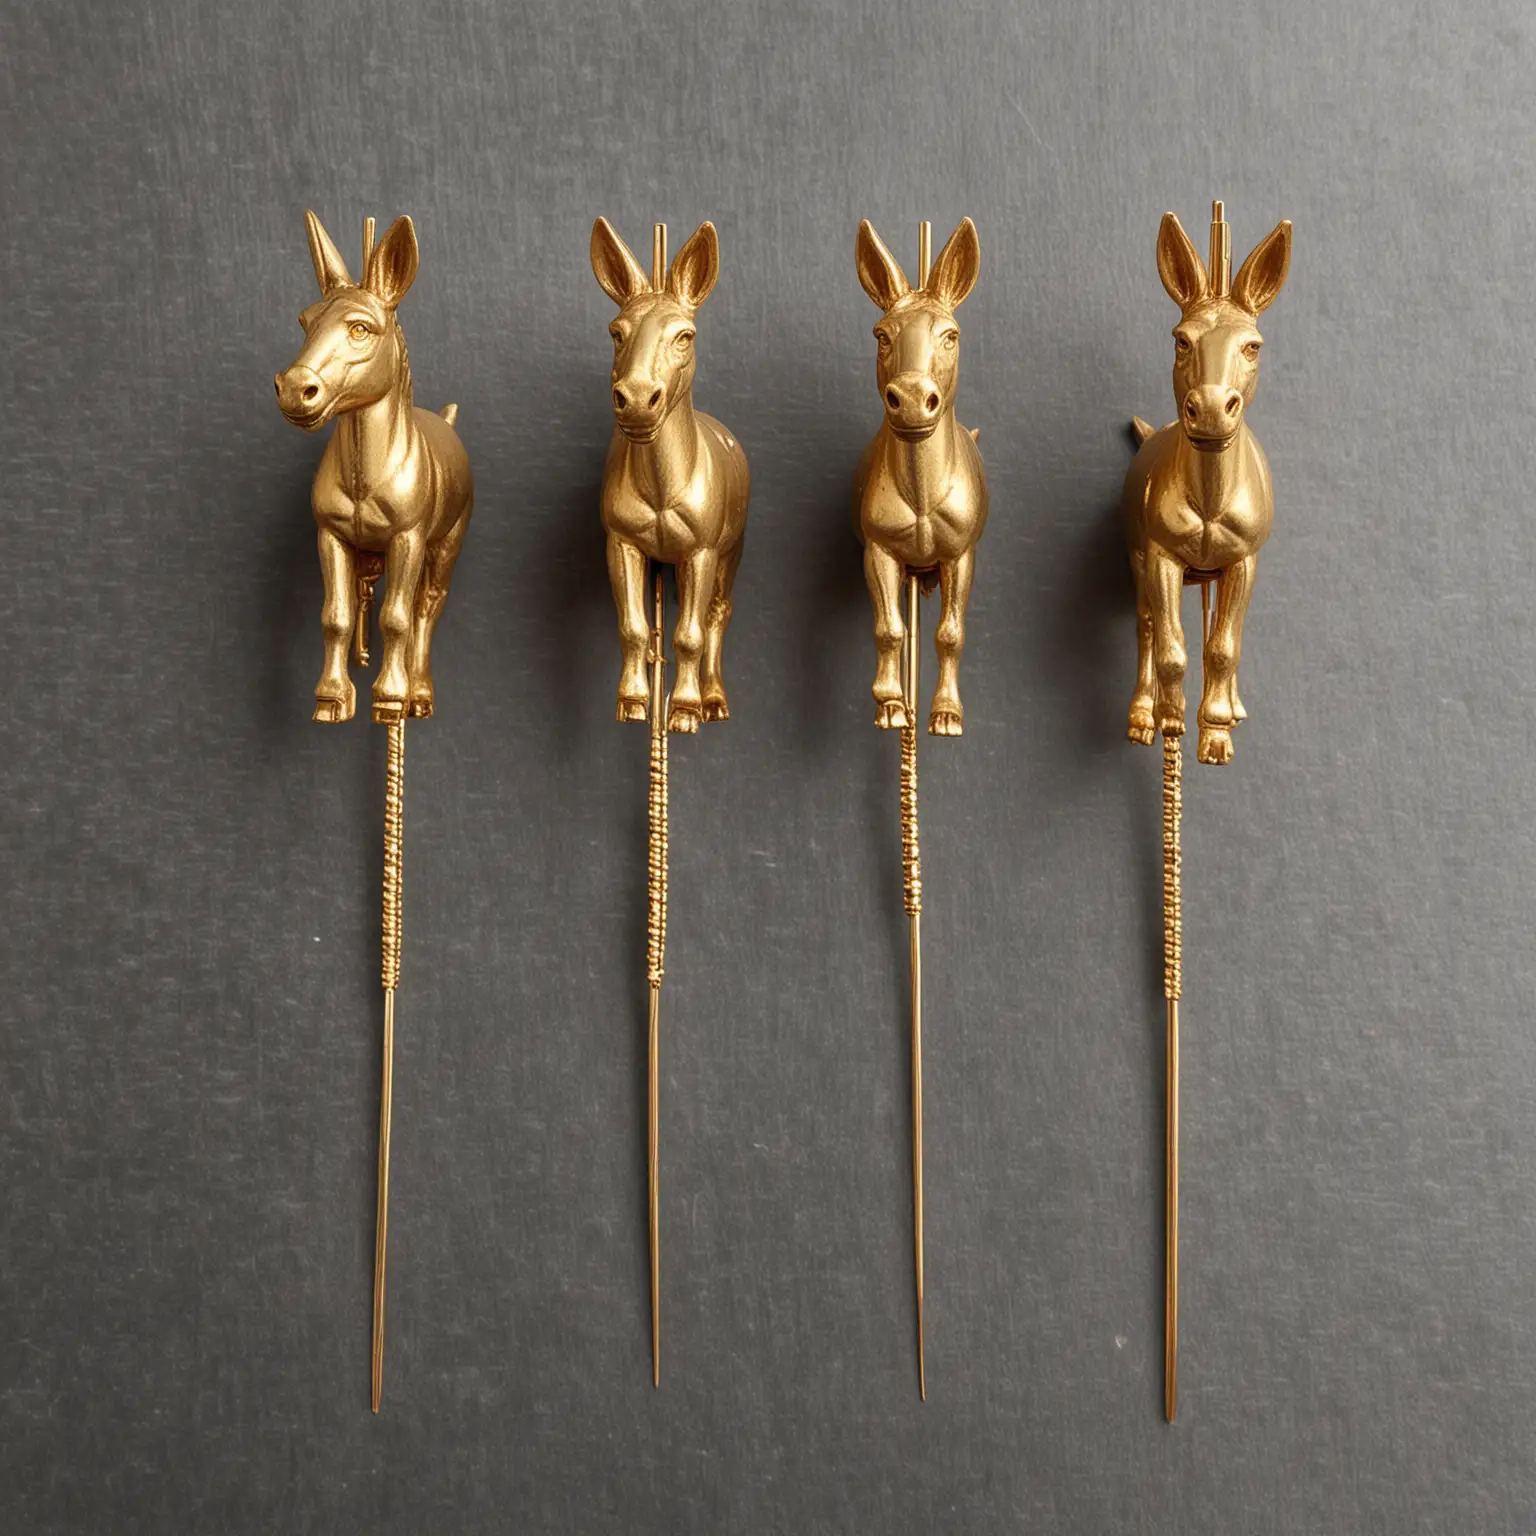 Elegant Gold Cocktail Skewers with Donkey Figurine Toppers